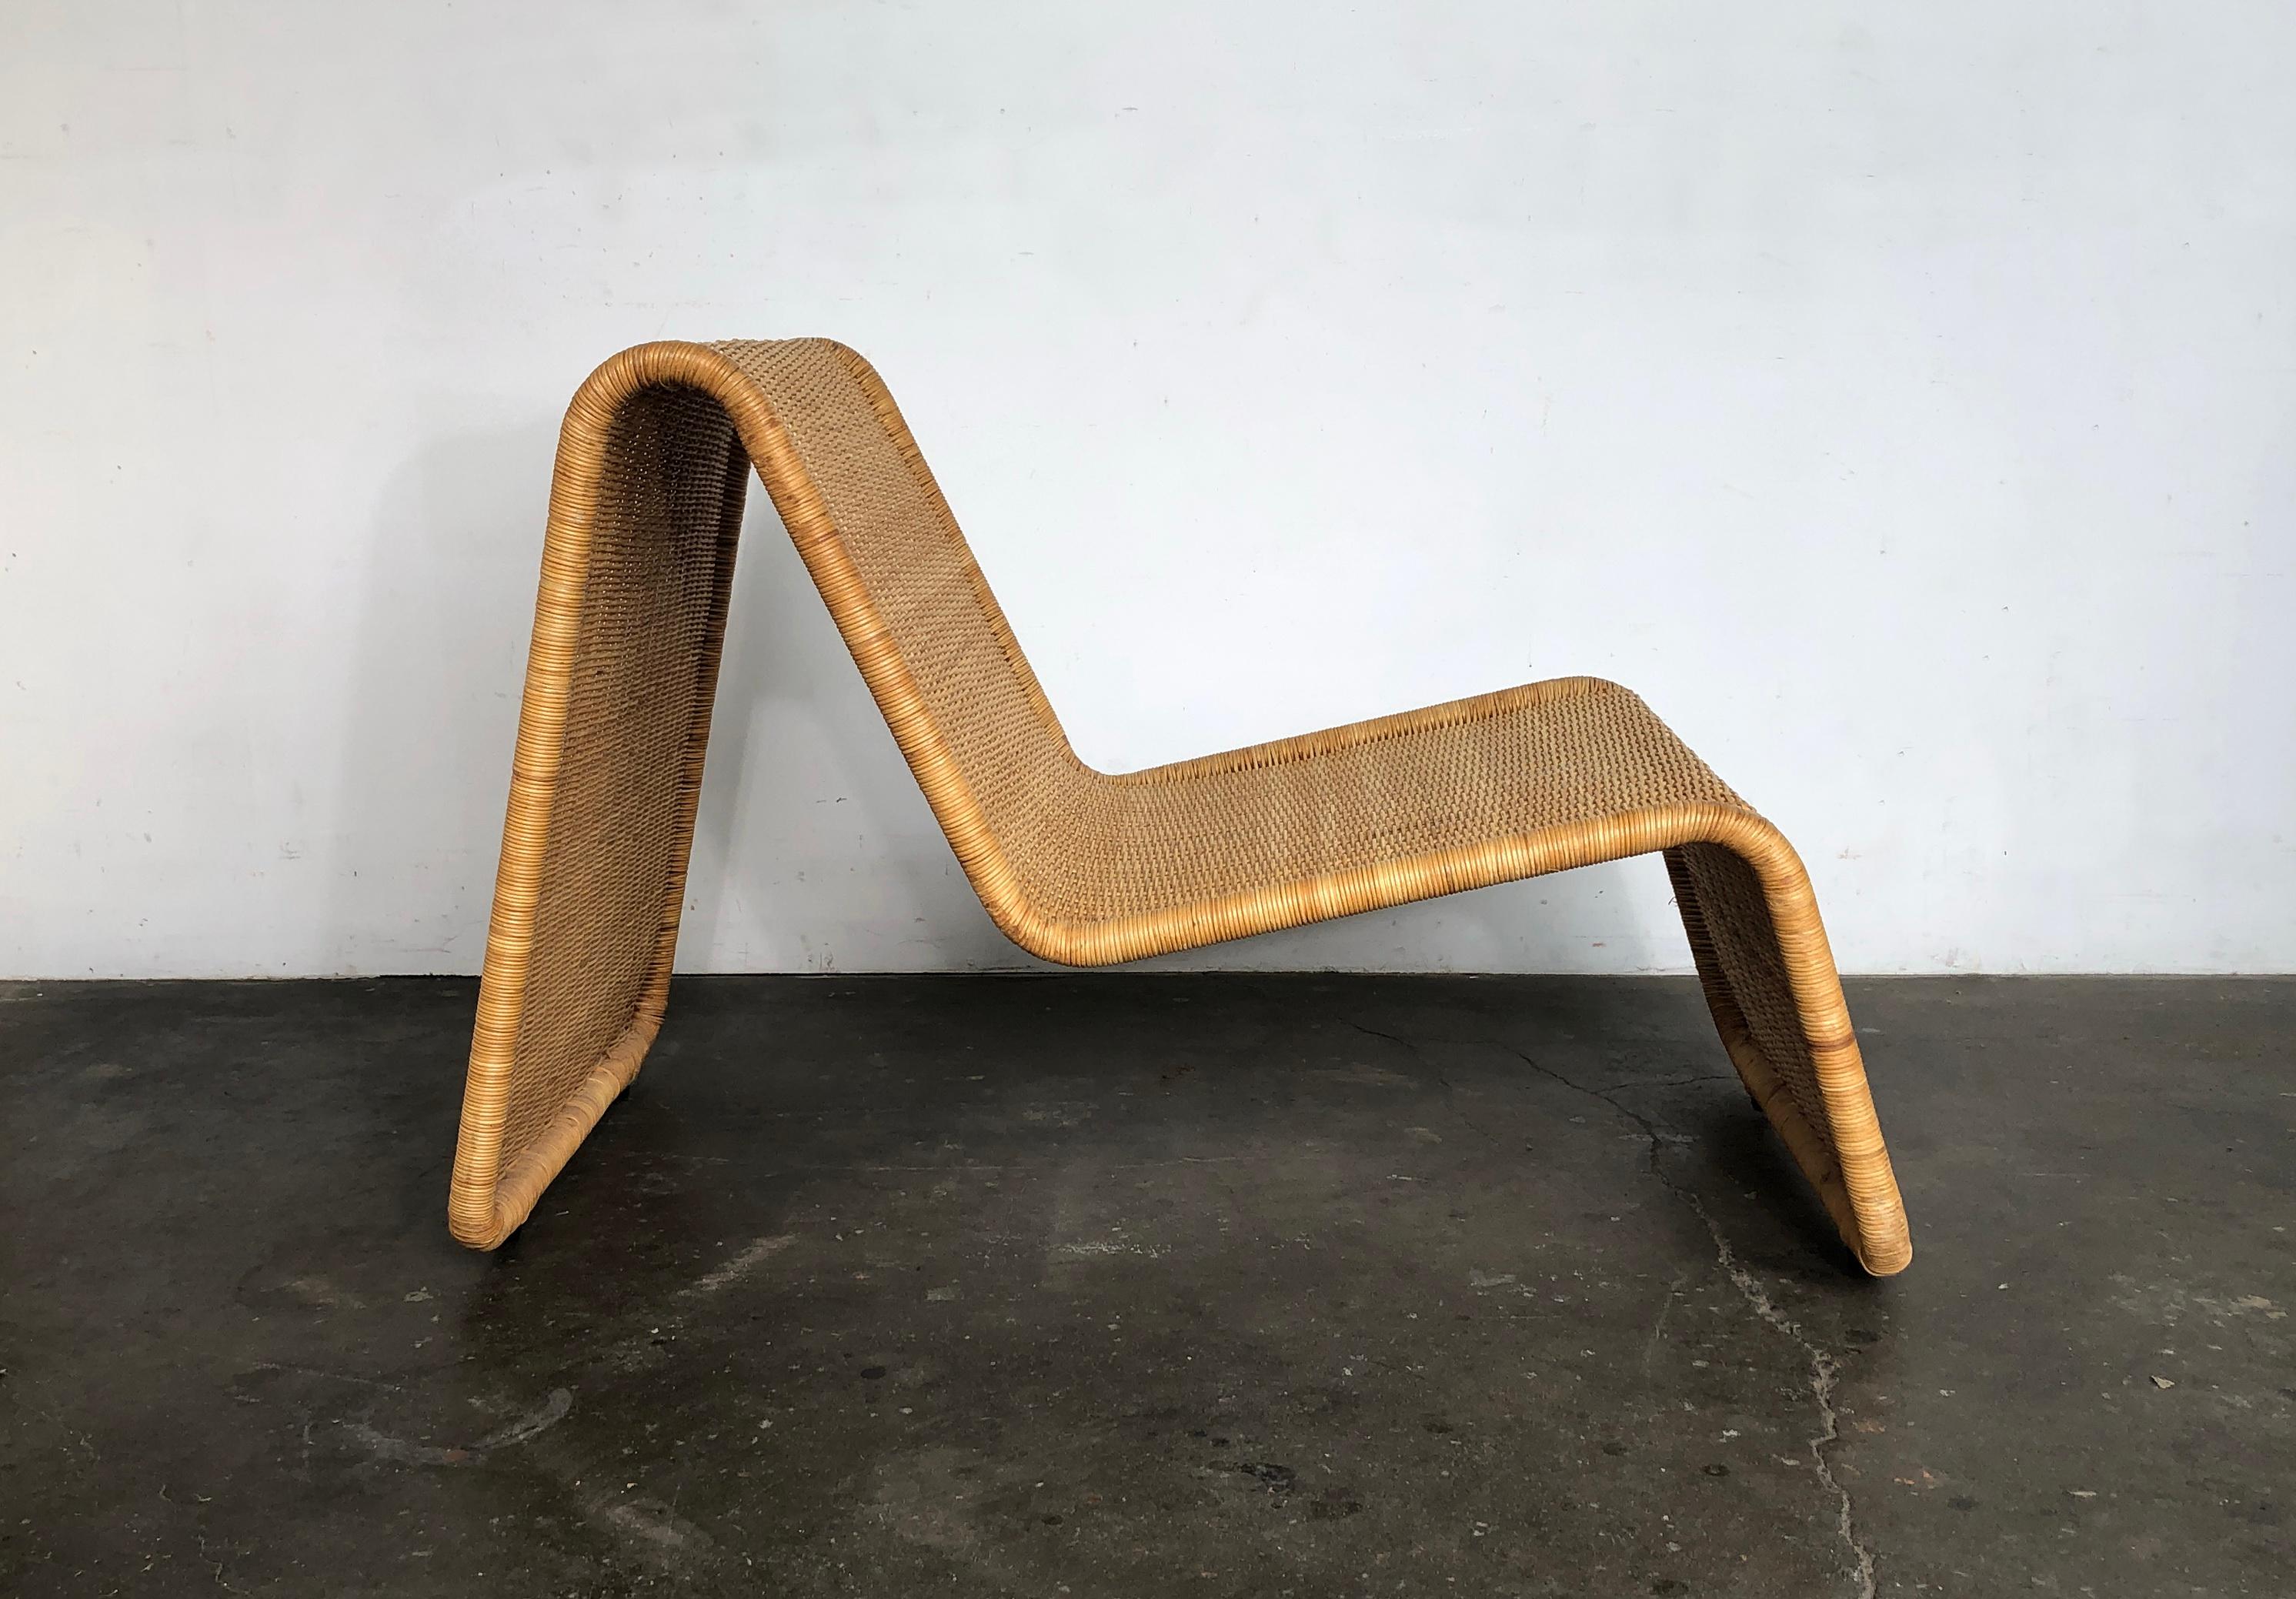 Designed by Tito Agnoli circa 1960s for Pierantonio Bonacina, Italy. The P3 lounge chair is made from woven wicker around a tubular steel frame. Its iconic sculptural shape is both ergonomic and incredibly comfortable to sit in. Overall great